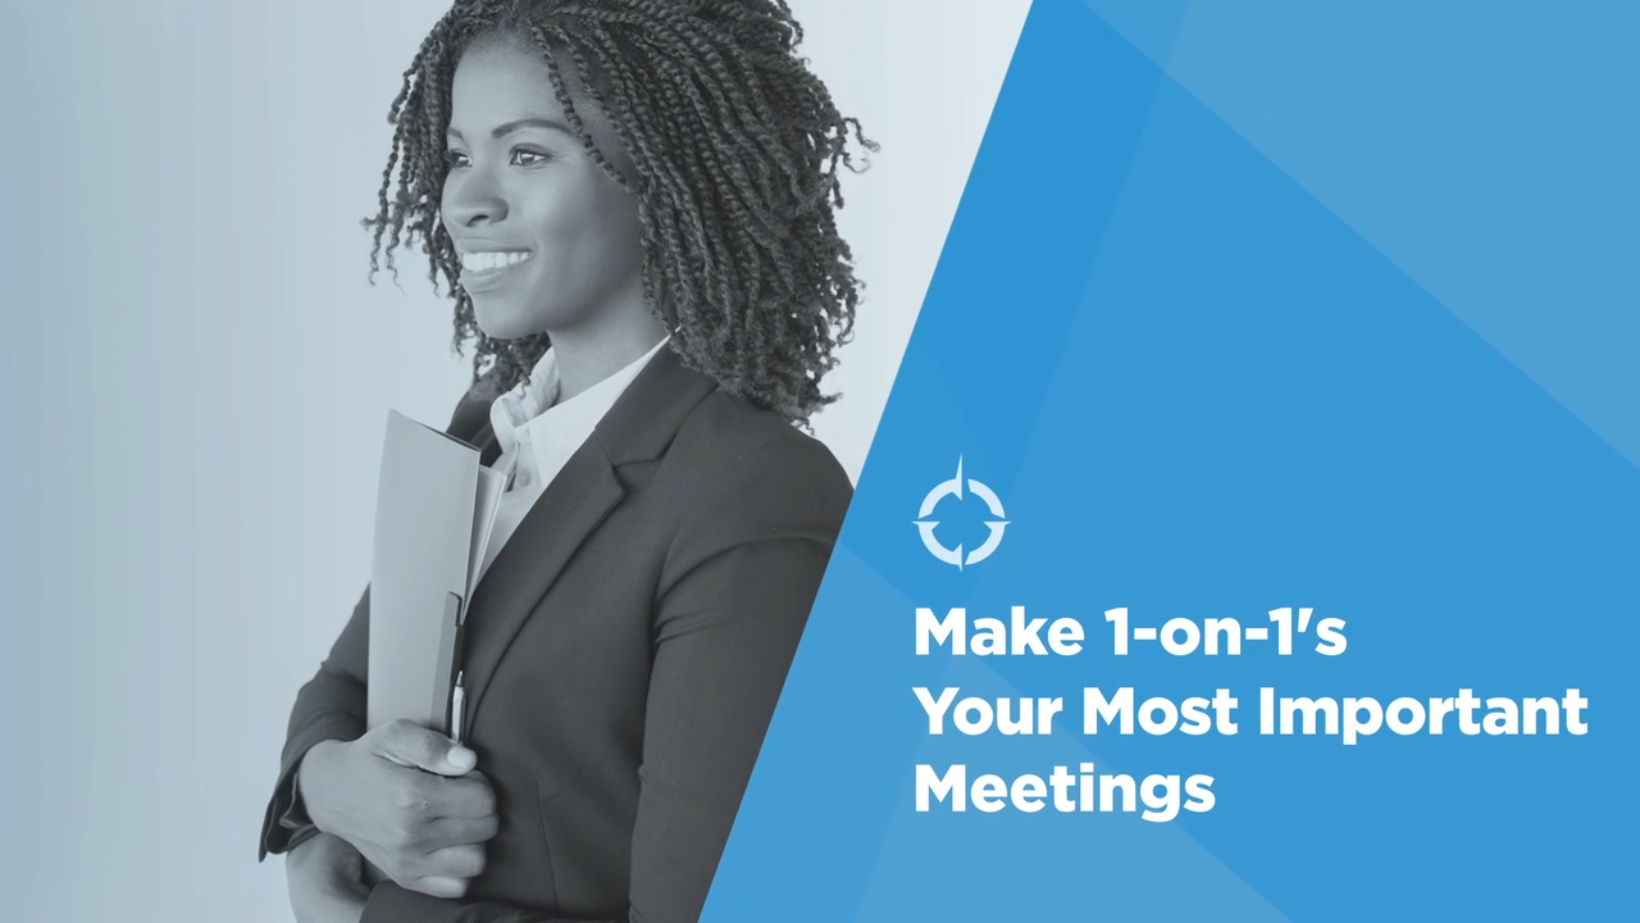 Video: Be a Better Leader: Make 1:1s Your Most Important Meetings